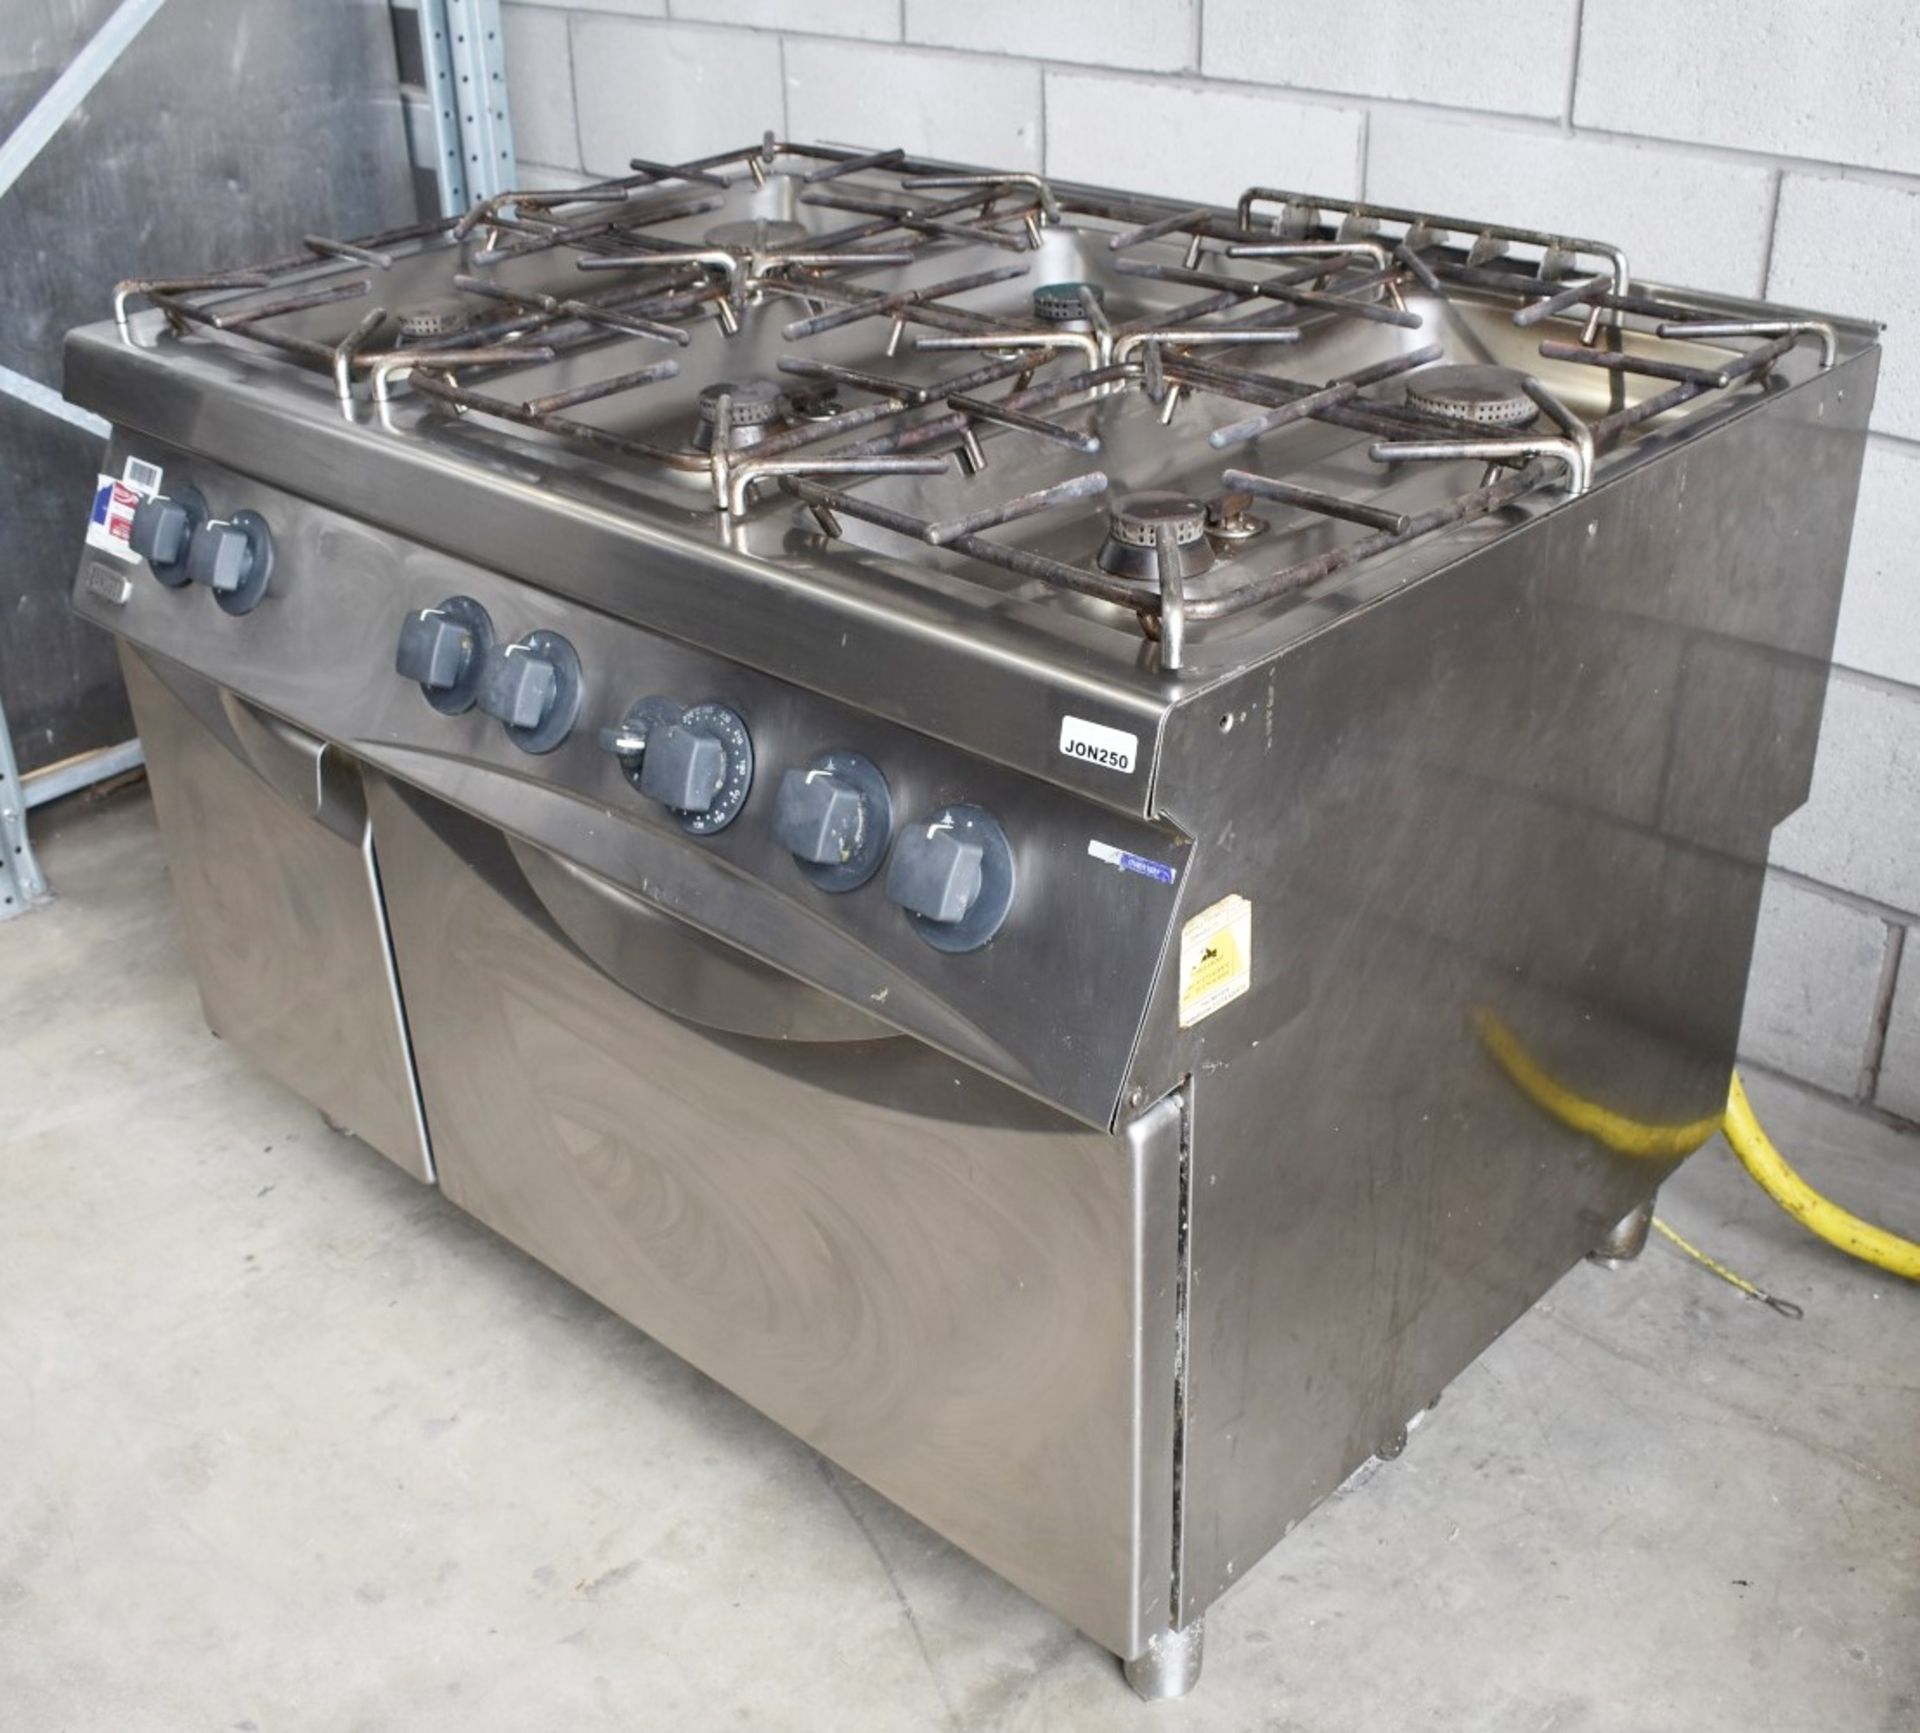 1 x Zanussi 6 Burner Gas Range Cooker with a Stainless Steel Exterior - Image 4 of 18